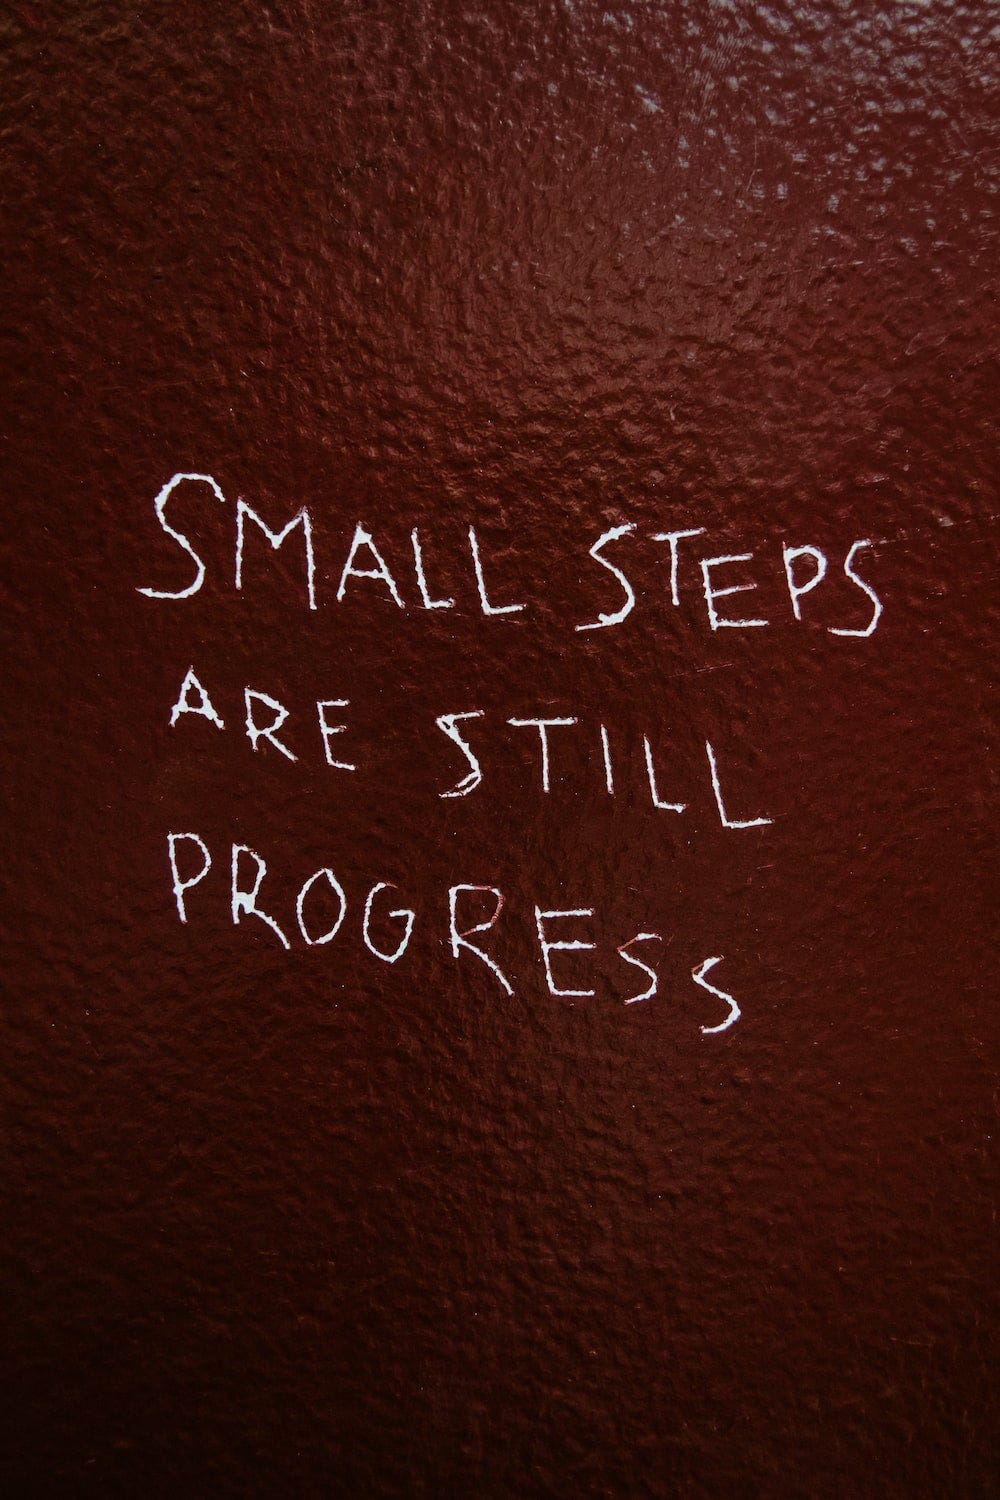 Charcoal writing on a wall about how small steps are still progress